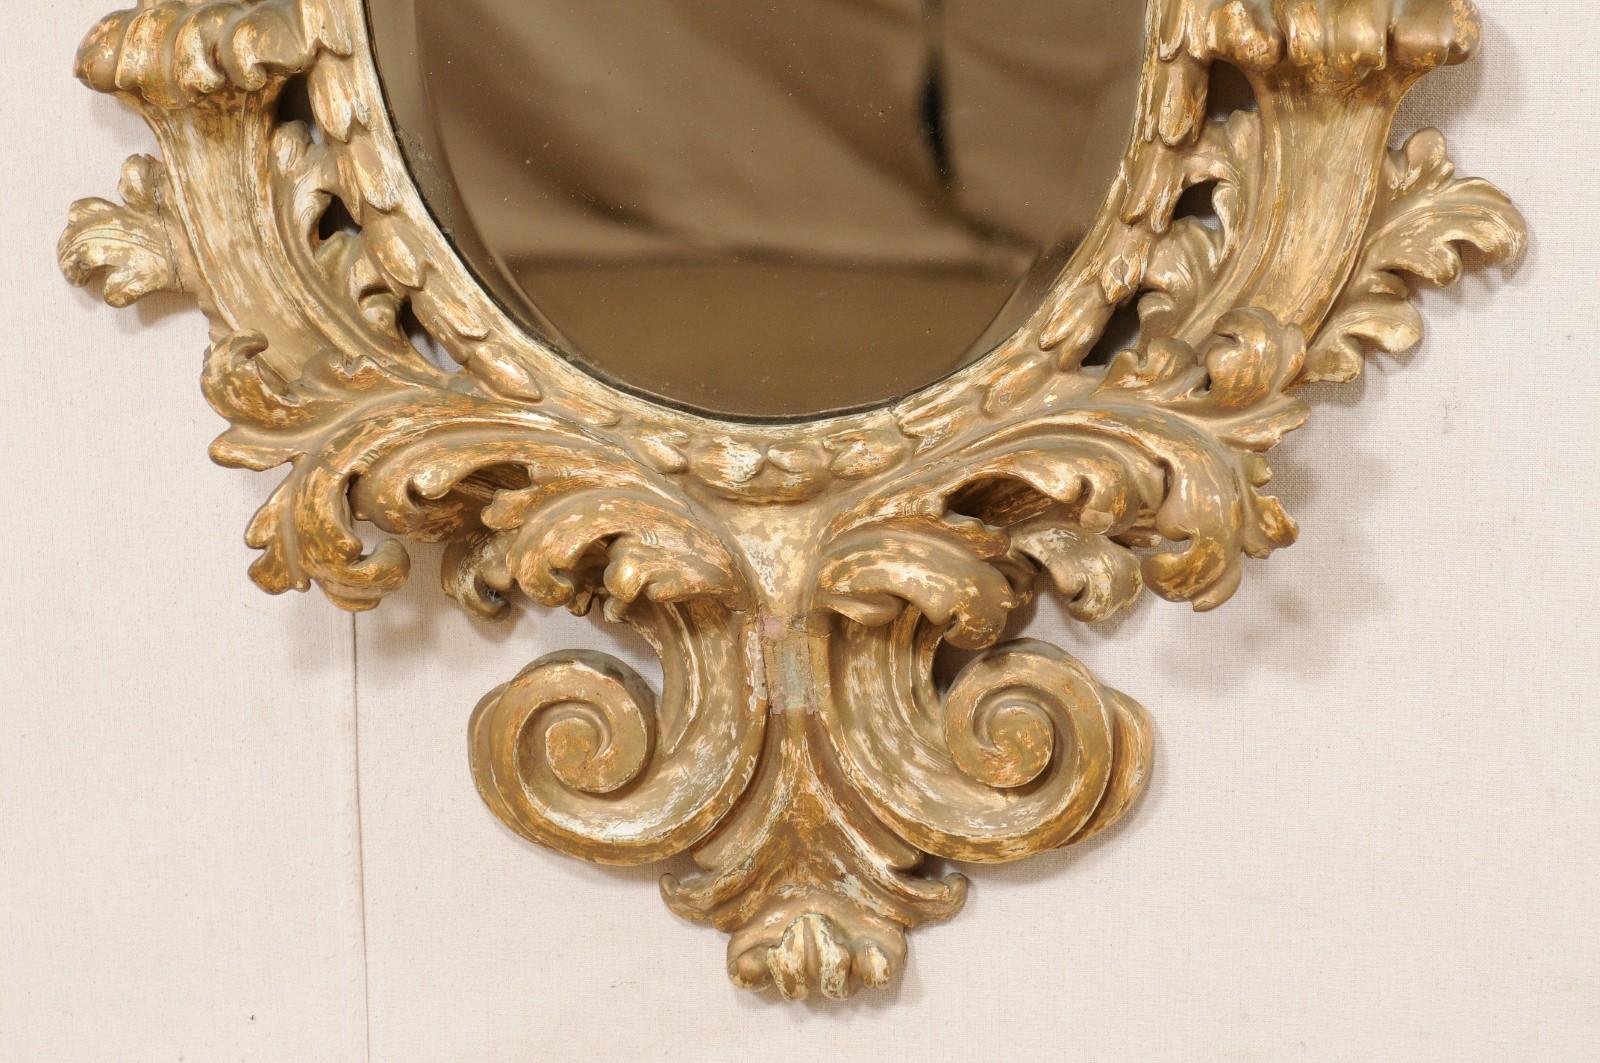 Gesso Italian Ornate Acanthus-Carved Mirror w/Oblong, Oval-Shaped Glass, 18th/19th C. For Sale